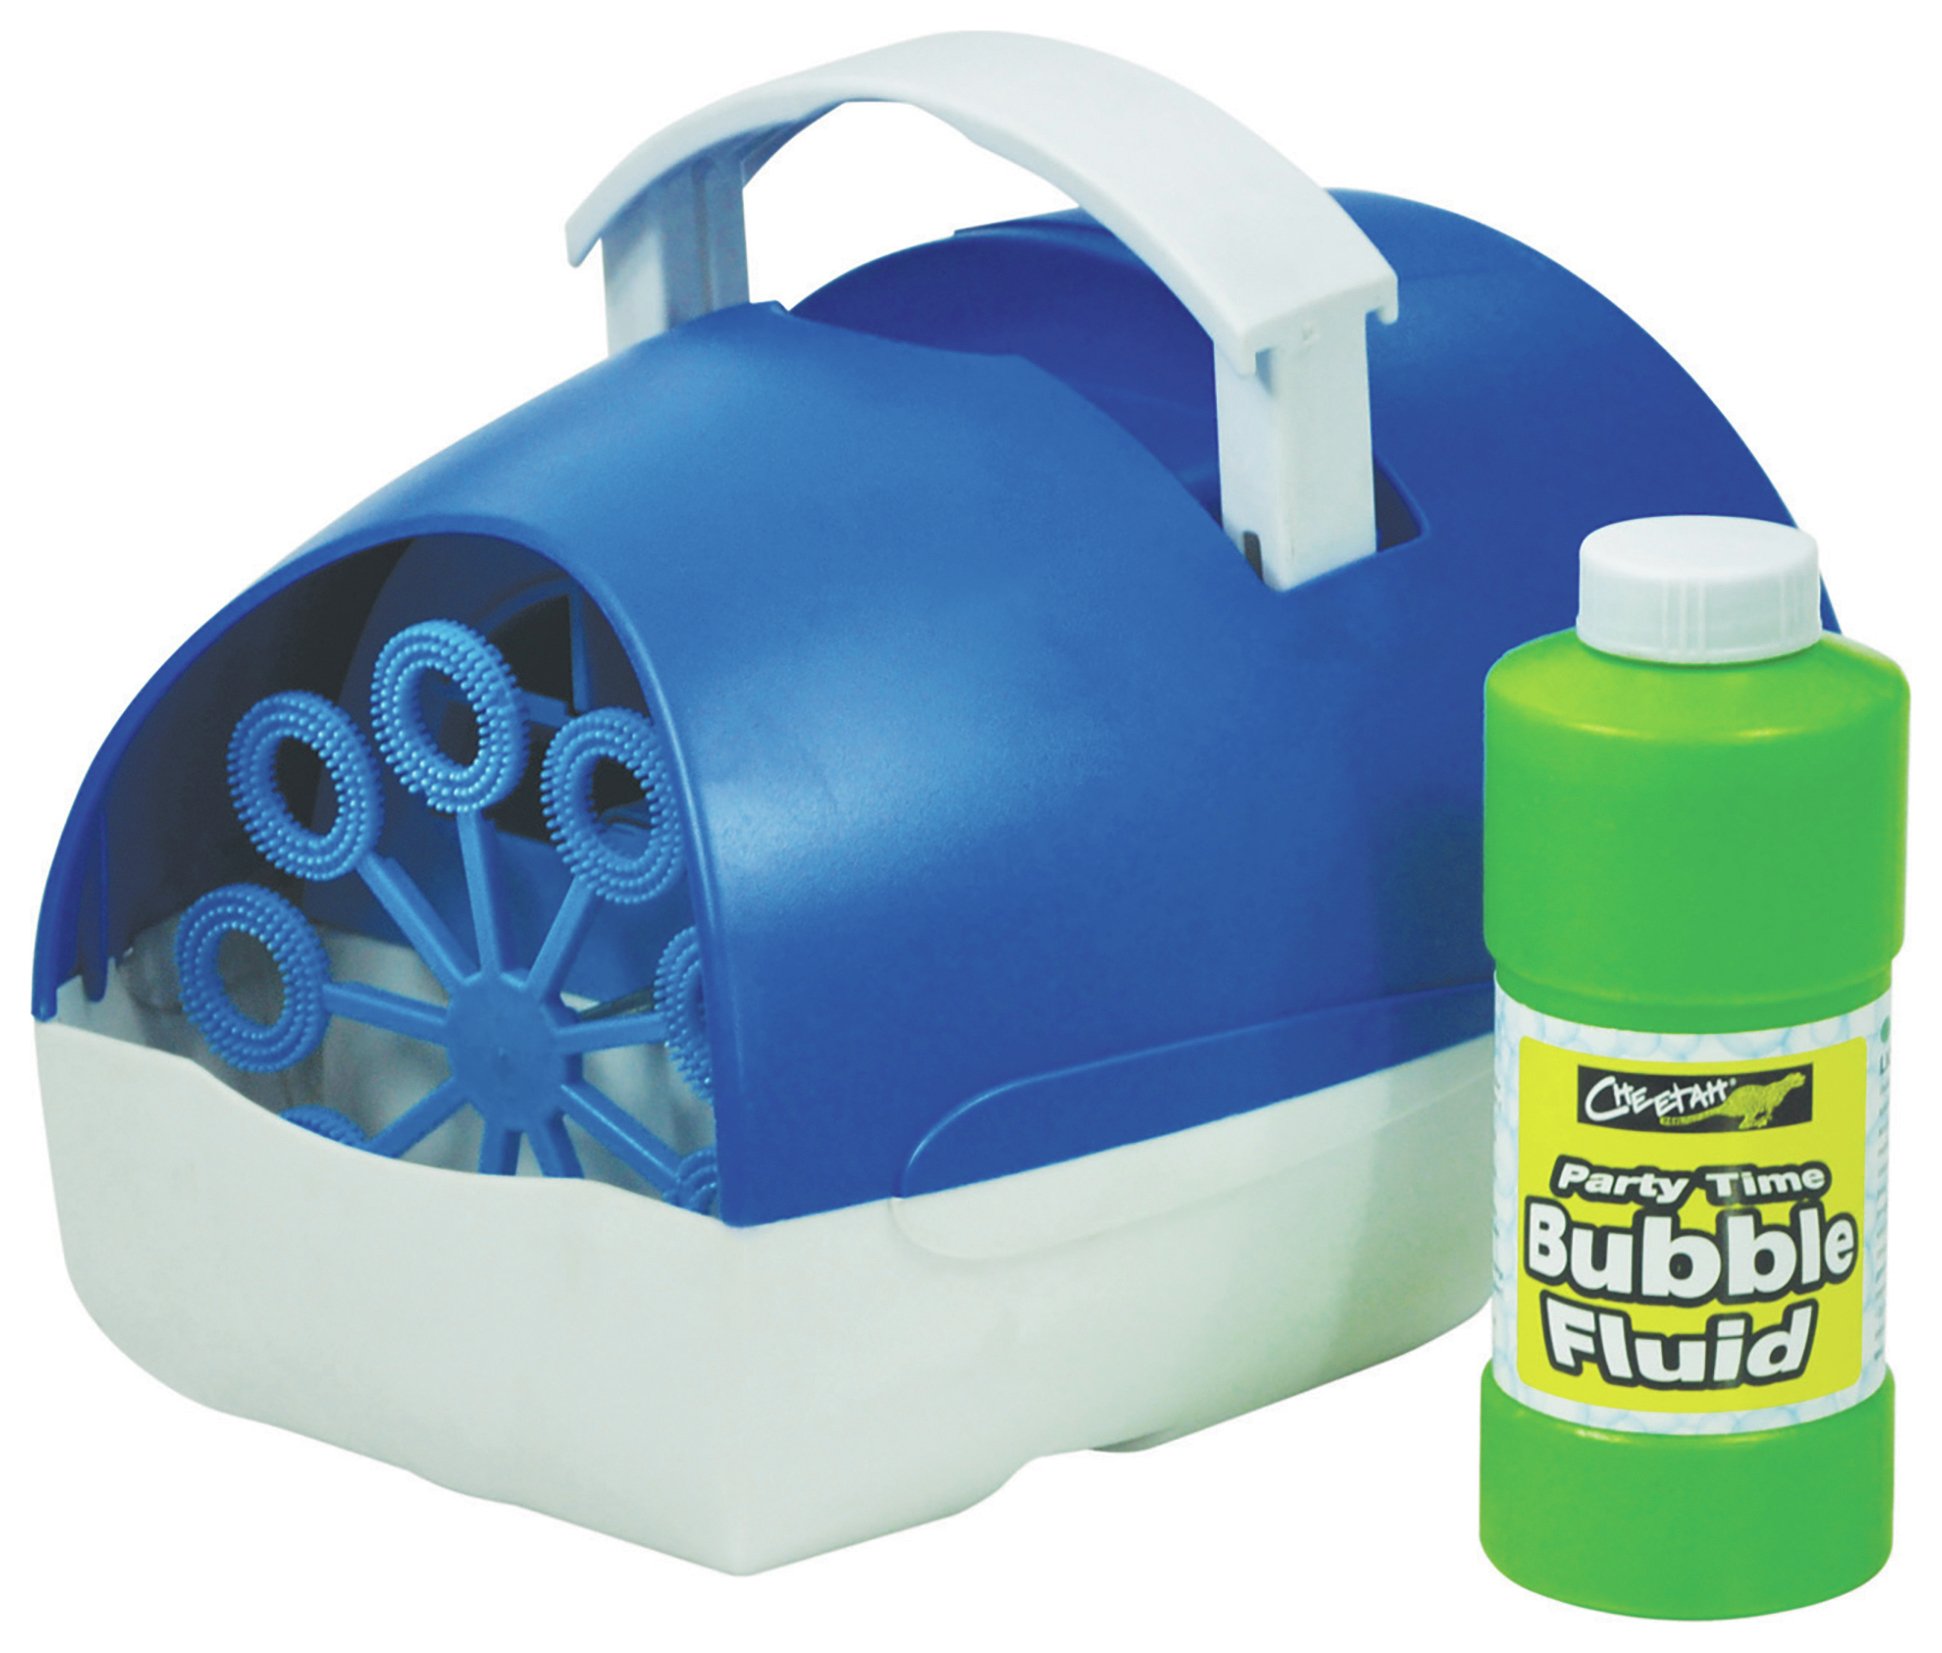 Cheetah Party Time Battery Operated Bubble Machine review